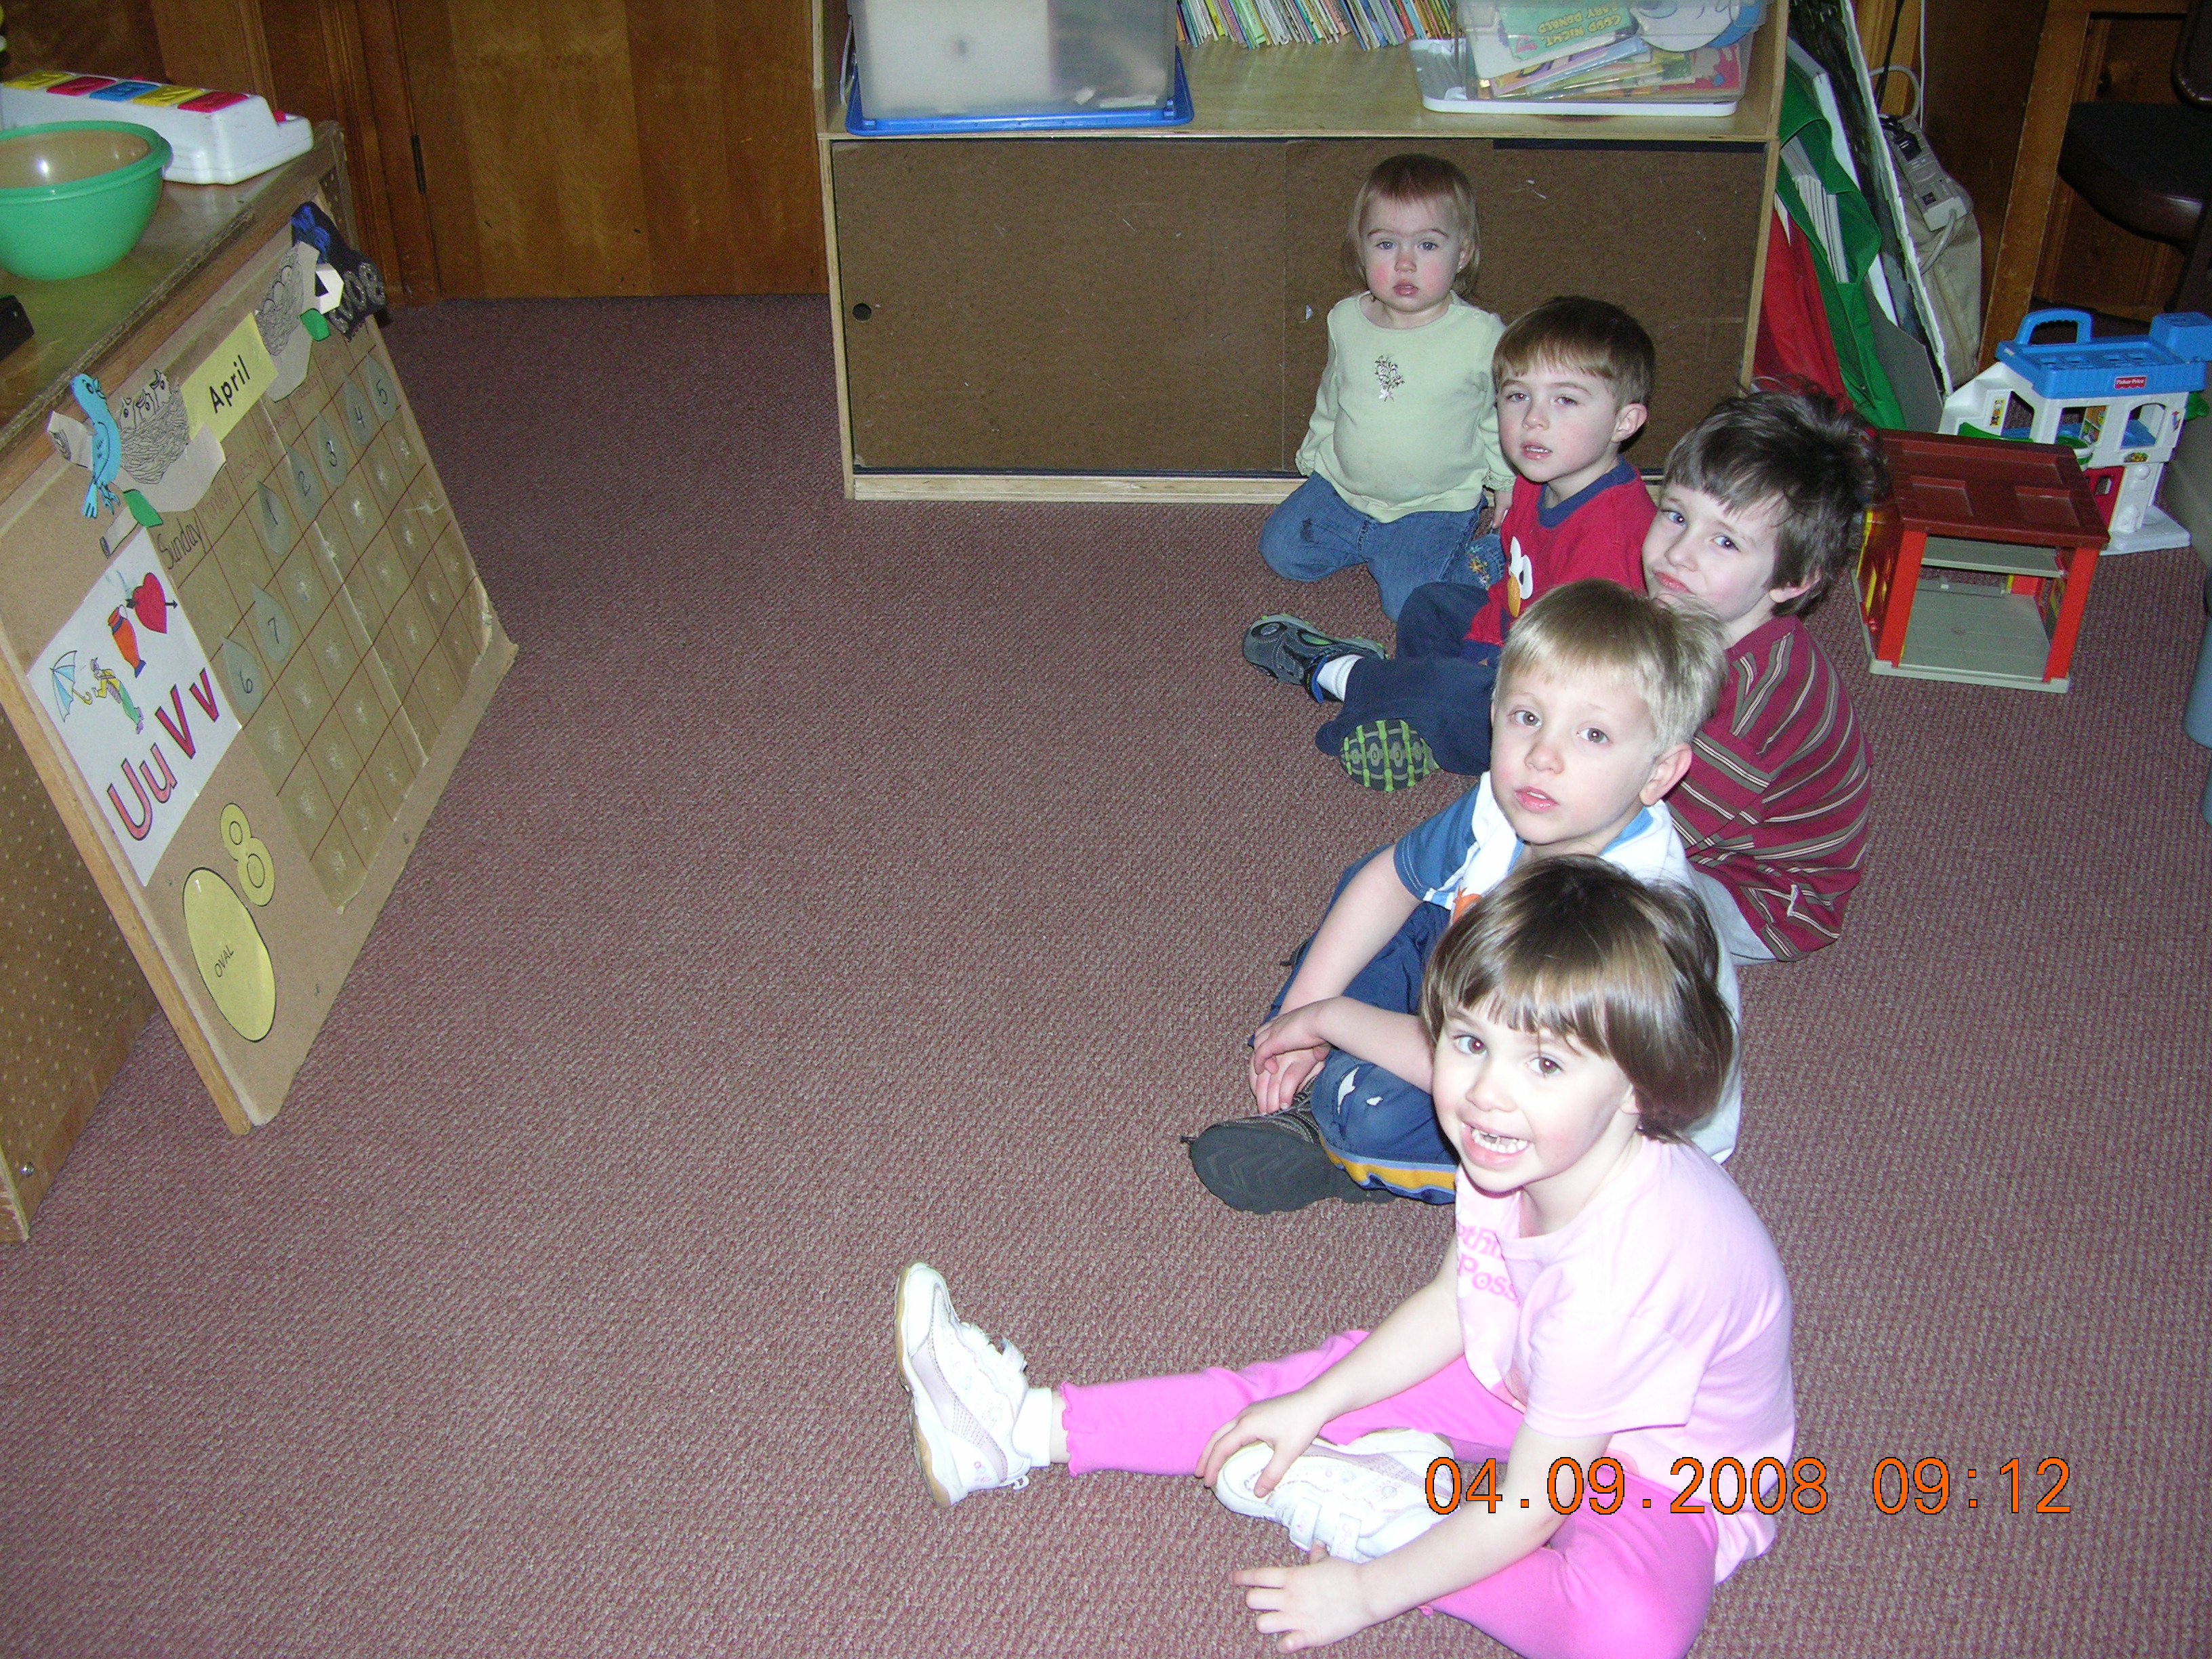 Children during group